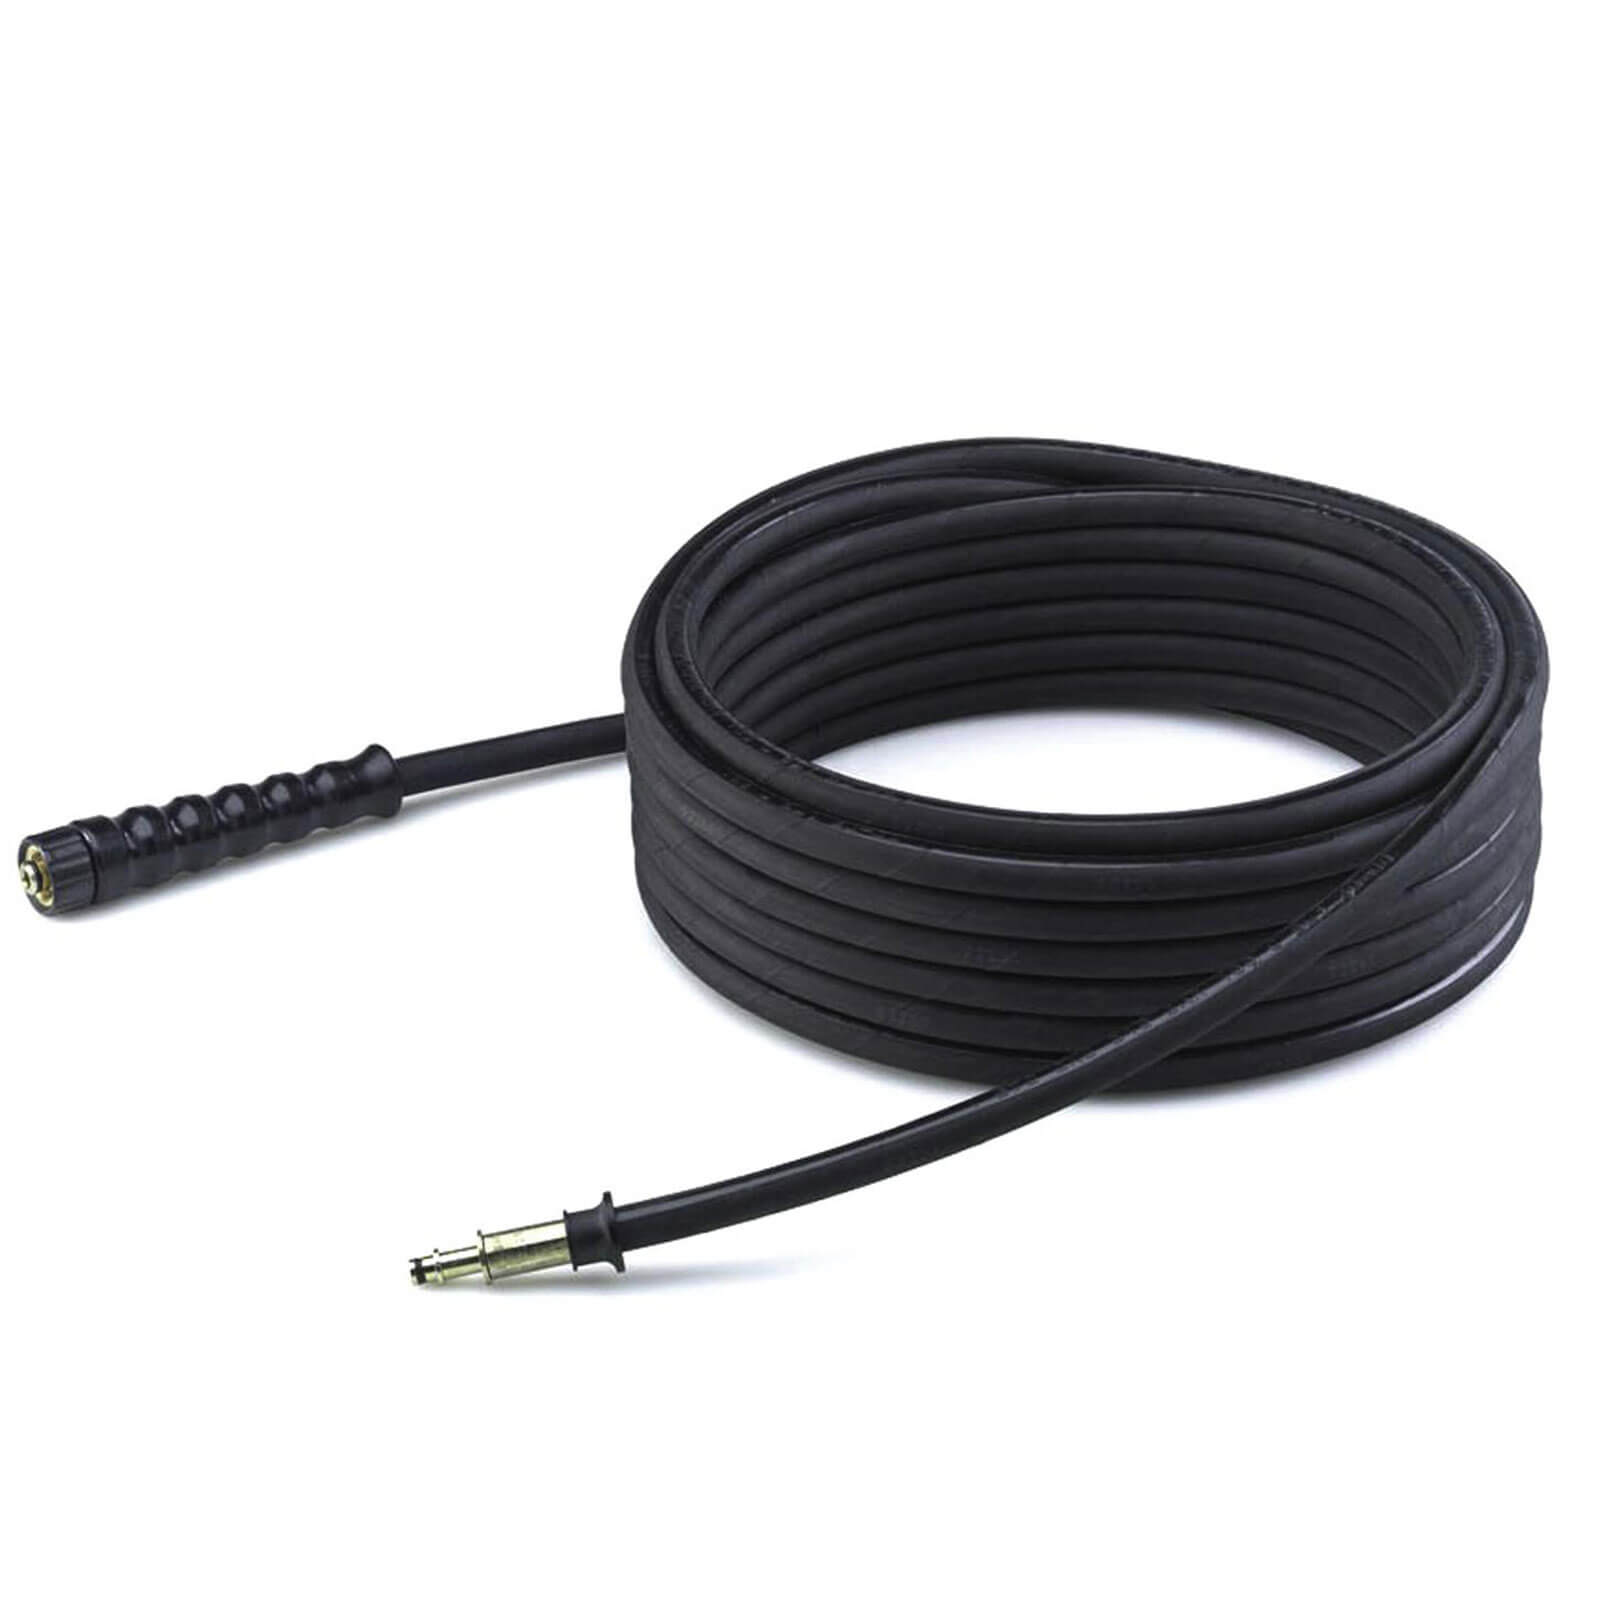 Karcher Basic Replacement 10 Metre High Pressure Hose for HD, HDS & XPERT Pressure Washers